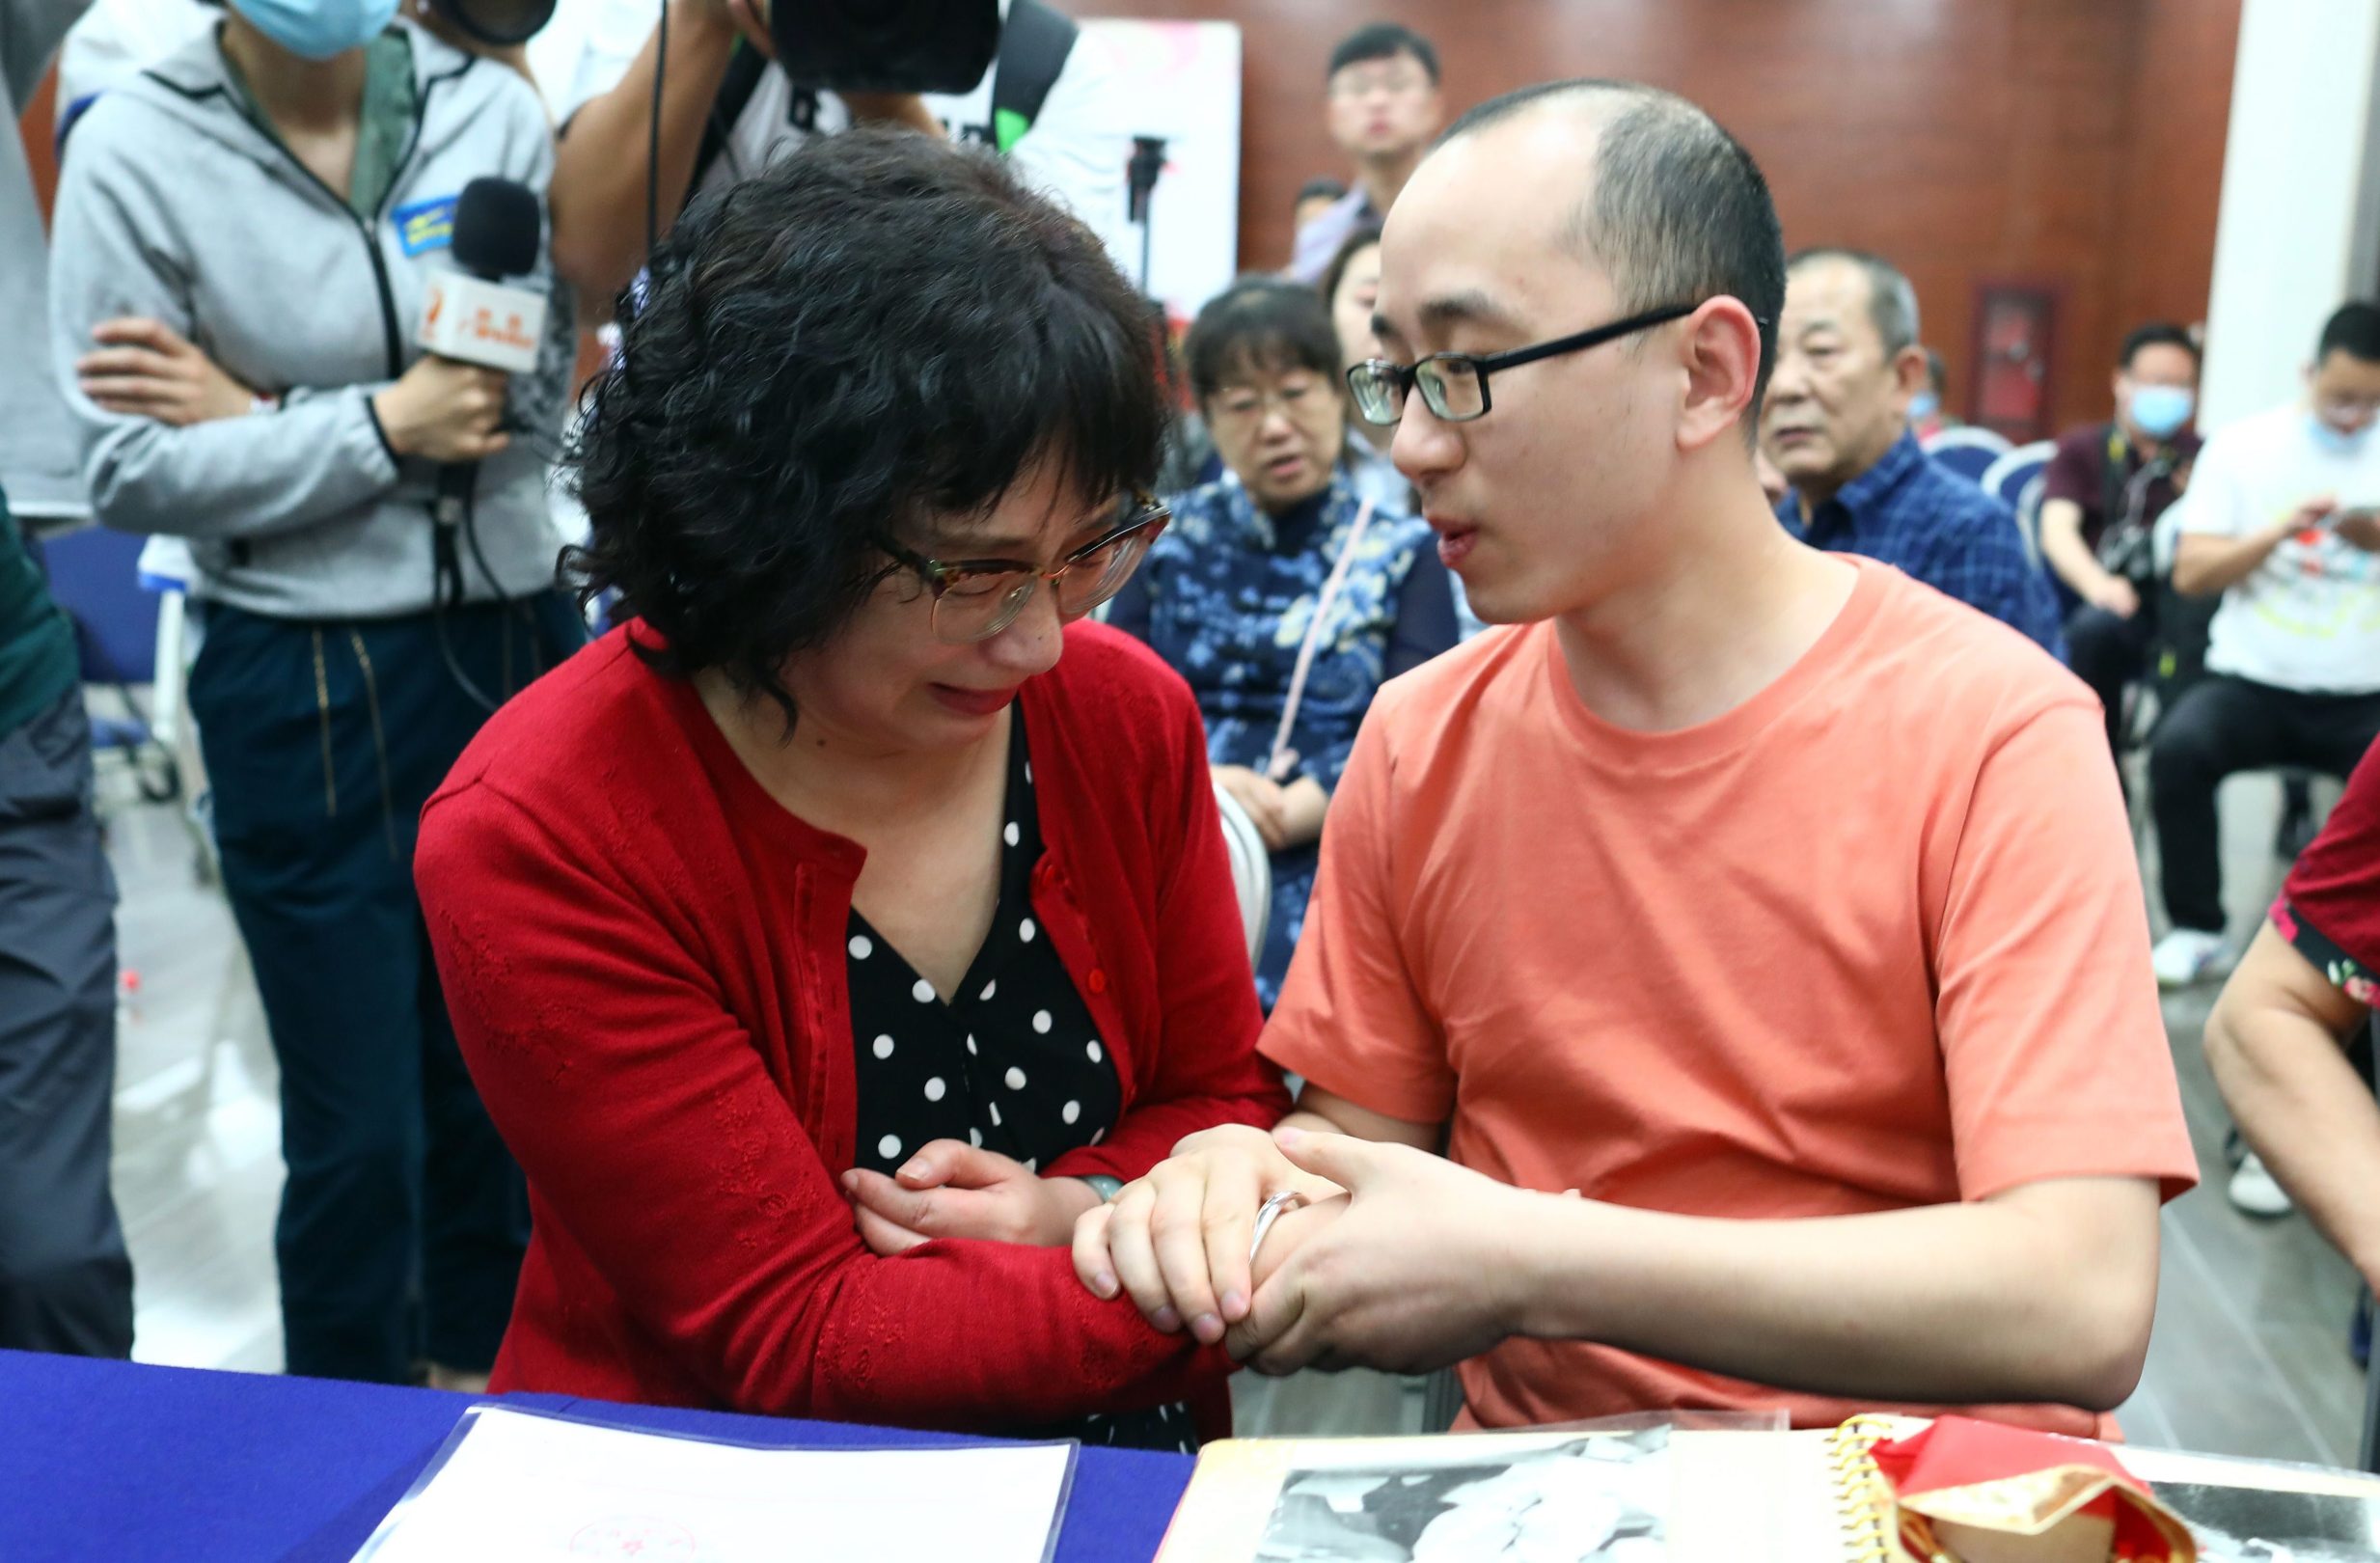 This photo taken on May 18, 2020 shows Mao Yin (R) with his mother Li Jingzhi after they were reunited in Xian, in China's northern Shaanxi province. - A Chinese man who was kidnapped as a toddler 32 years ago has been reunited with his biological parents, after police used facial recognition technology to track him down. (Photo by STR / AFP) / China OUT